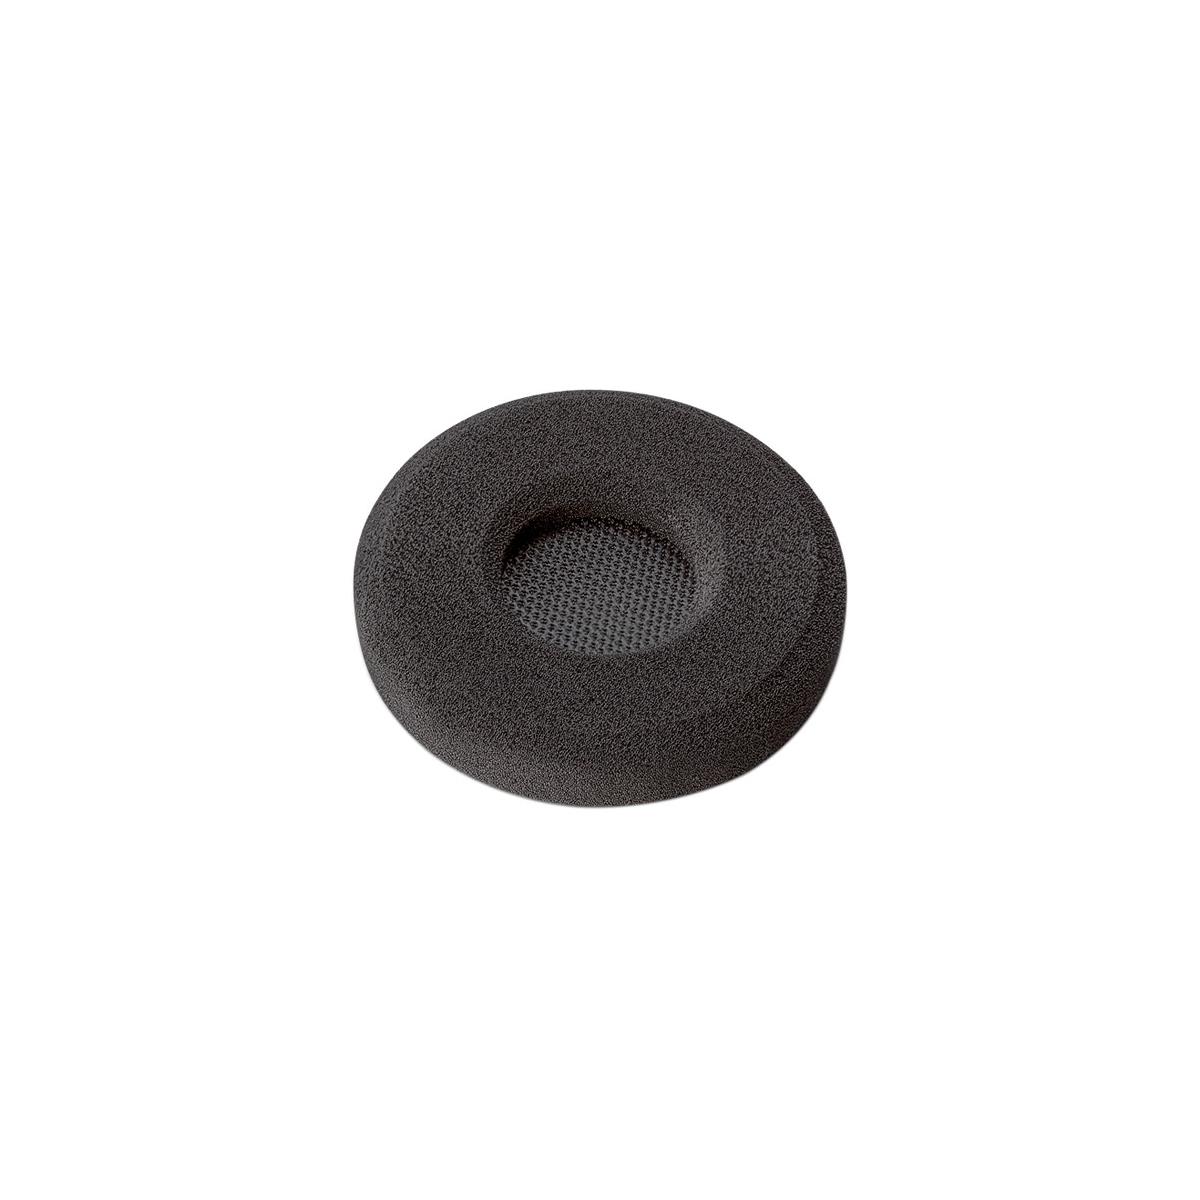 

Plantronics Spare Ear Foam Cushion for HW510 and HW520 Headphones, 2-Pack